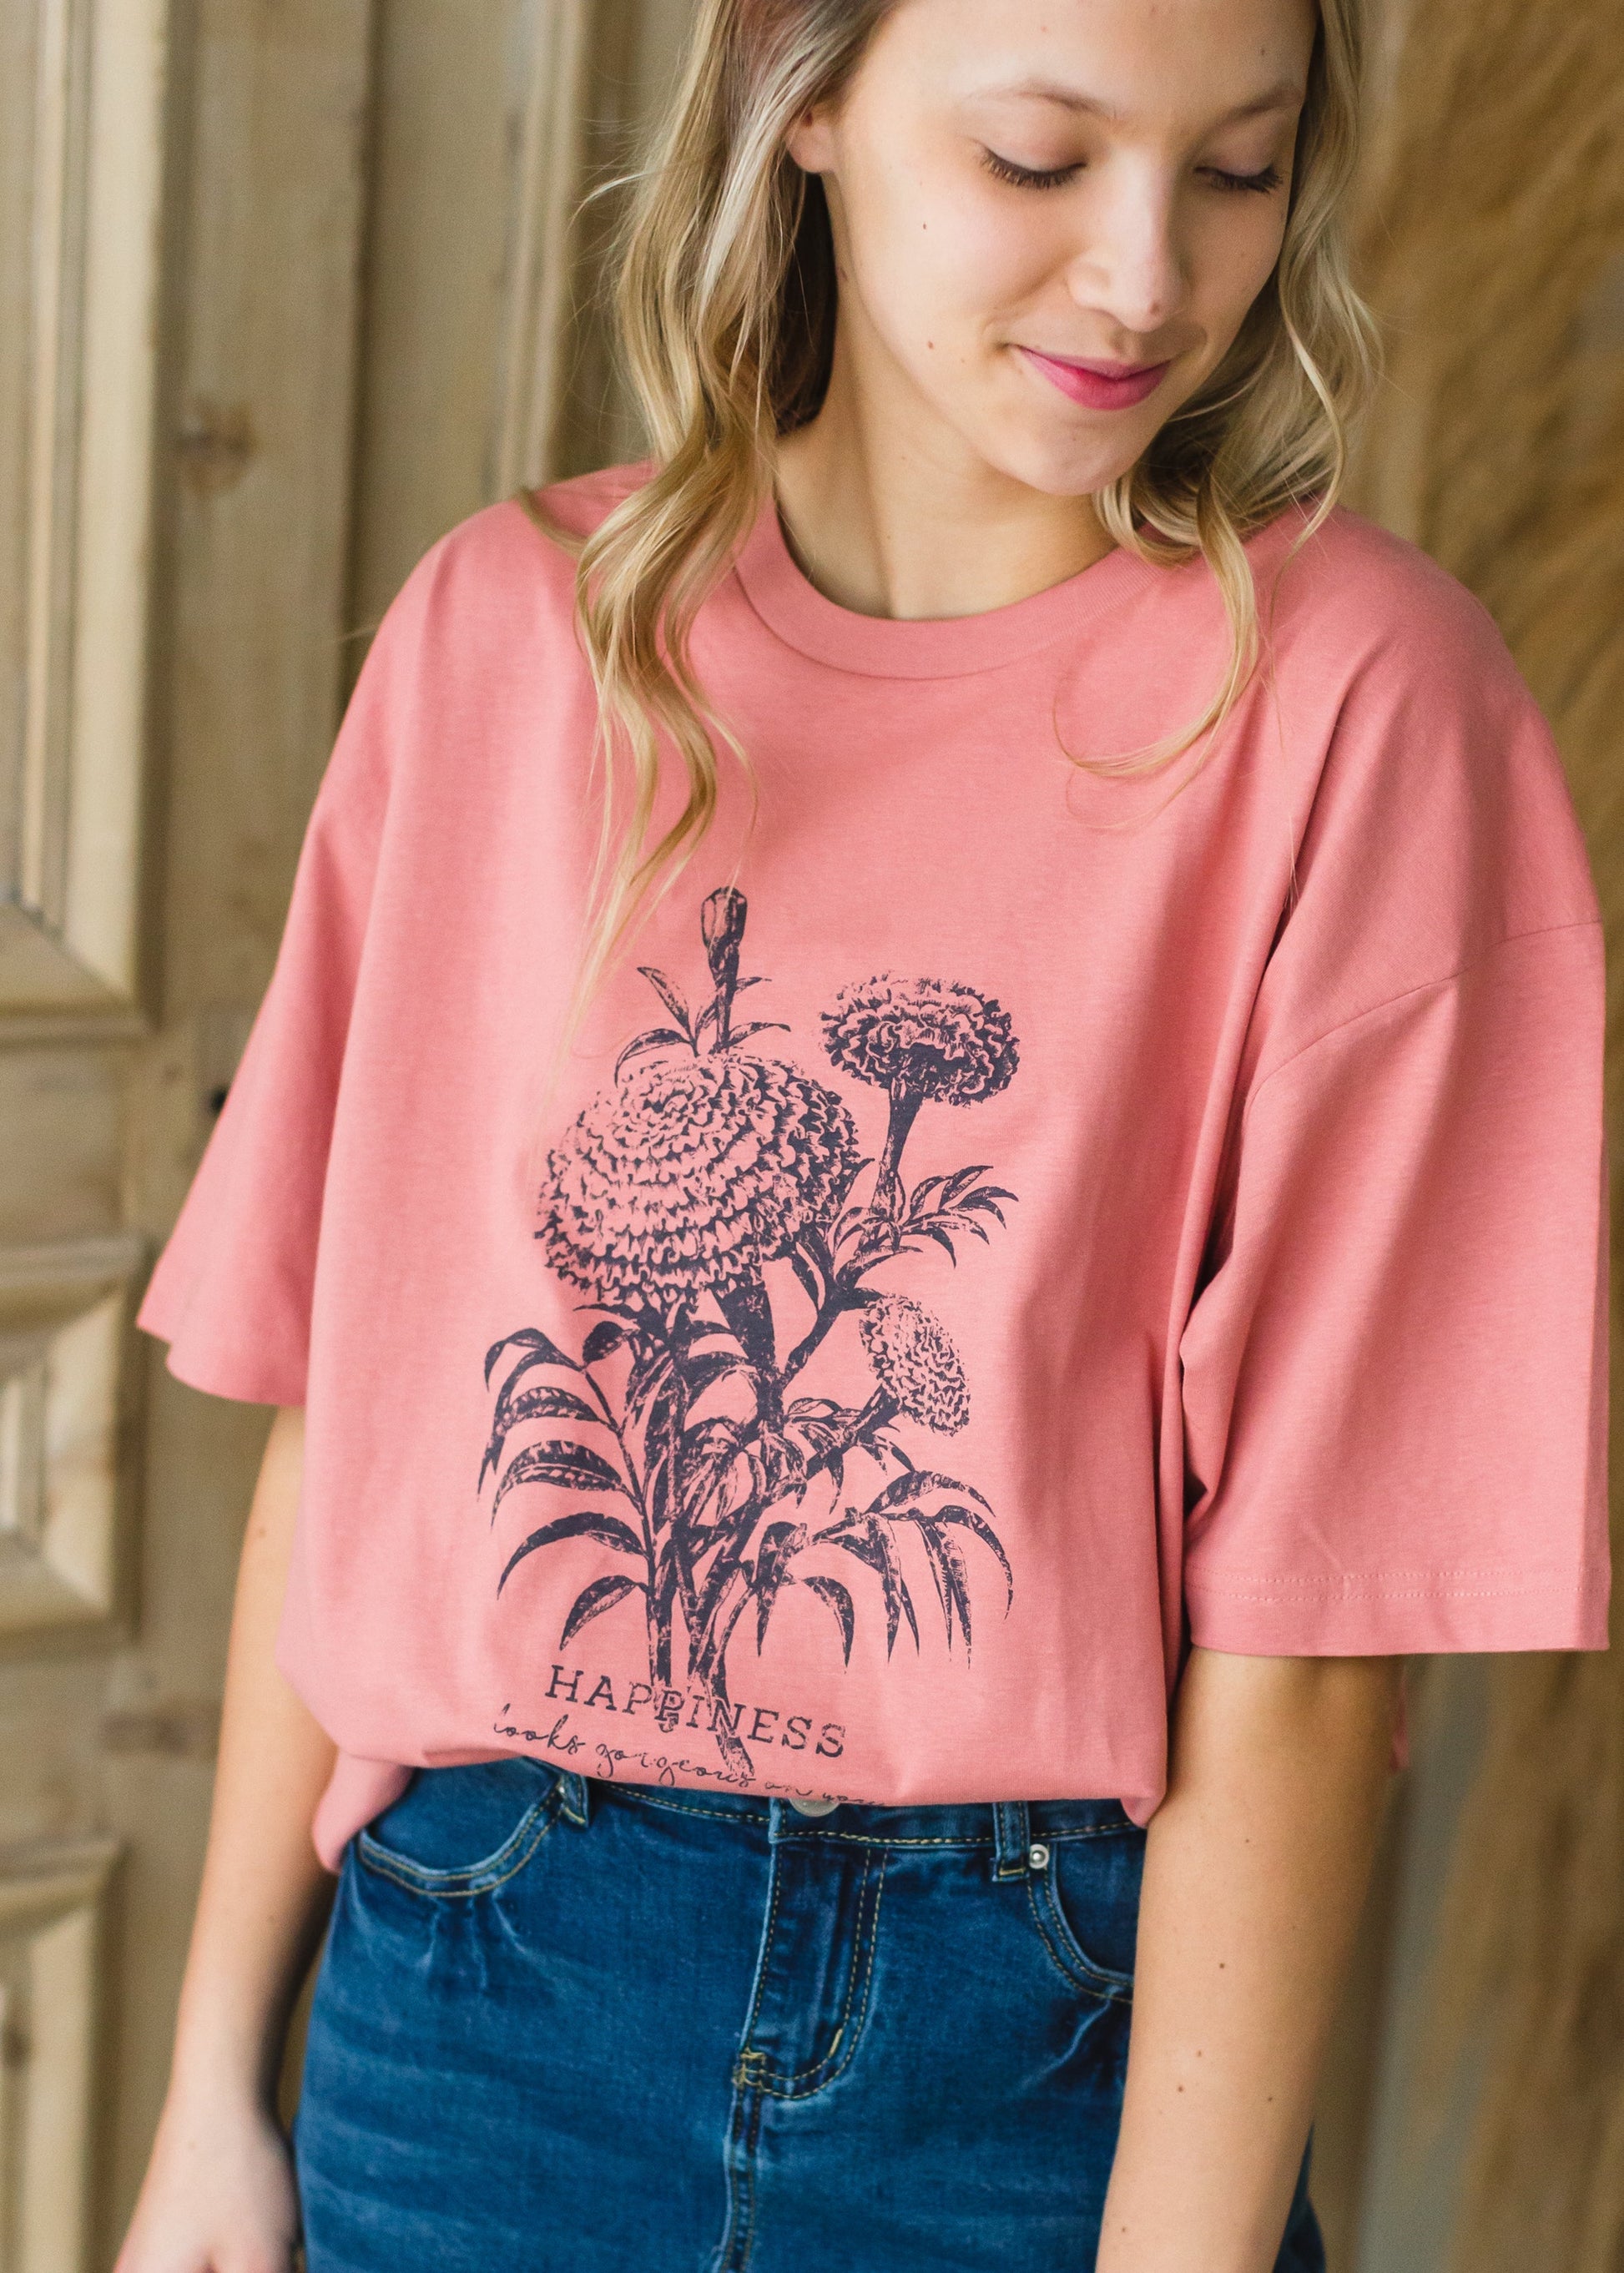 Wildflower Happiness Cotton Tee - FINAL SALE FF Tops